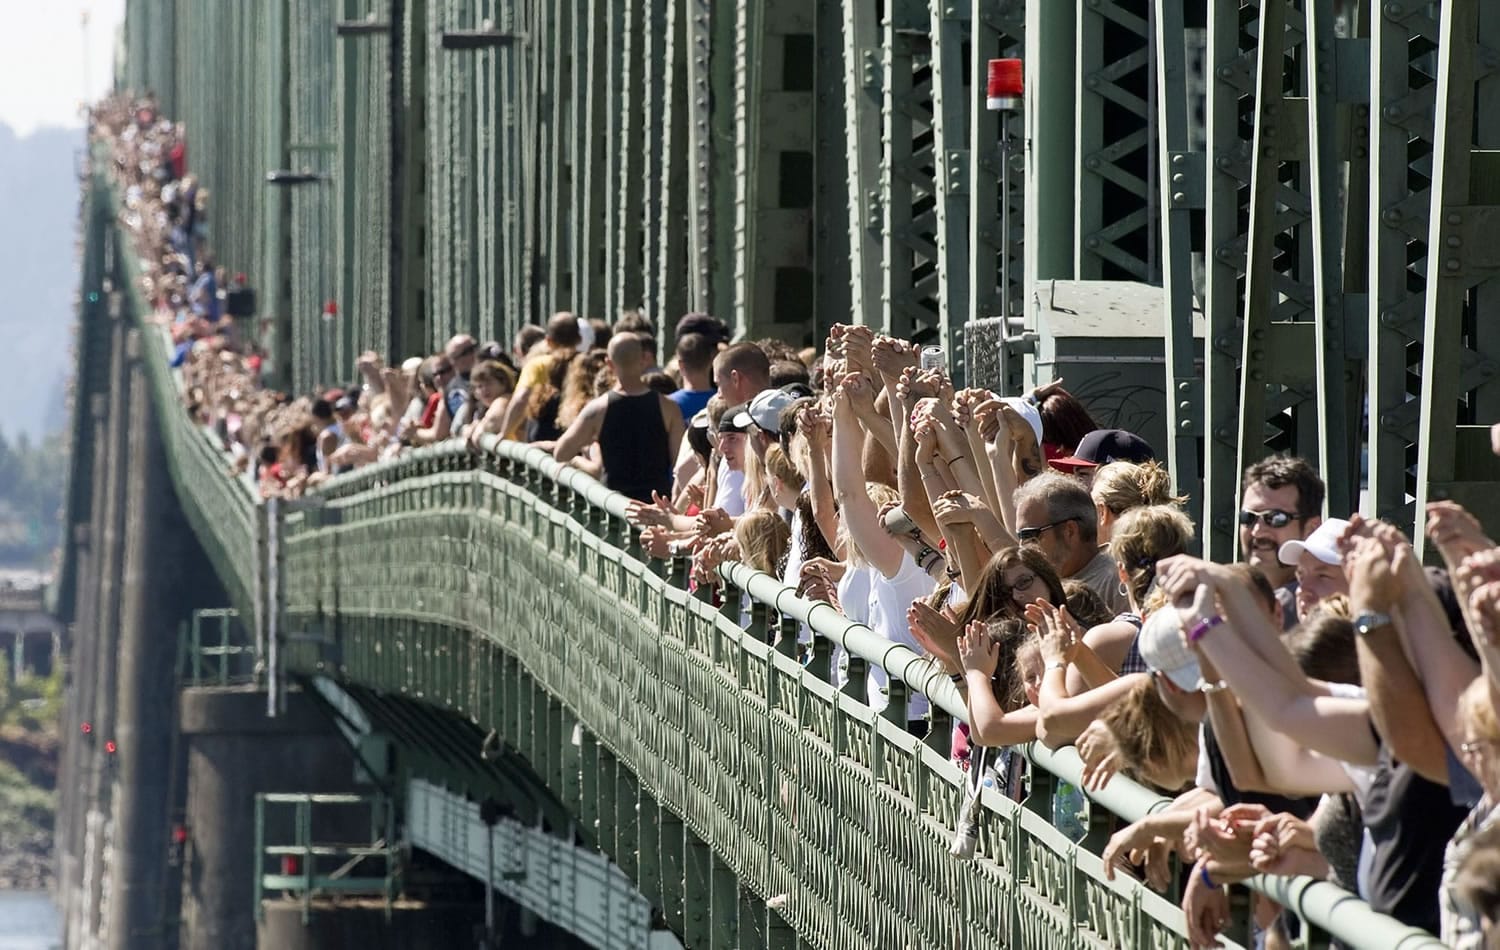 Nearly 2,300 people filed onto the Interstate 5 Bridge for the 10th annual Hands Across the Bridge event Monday to celebrate those recovering from addiction, as well as mark the beginning of National Alcohol and Drug Addiction Recovery Month.